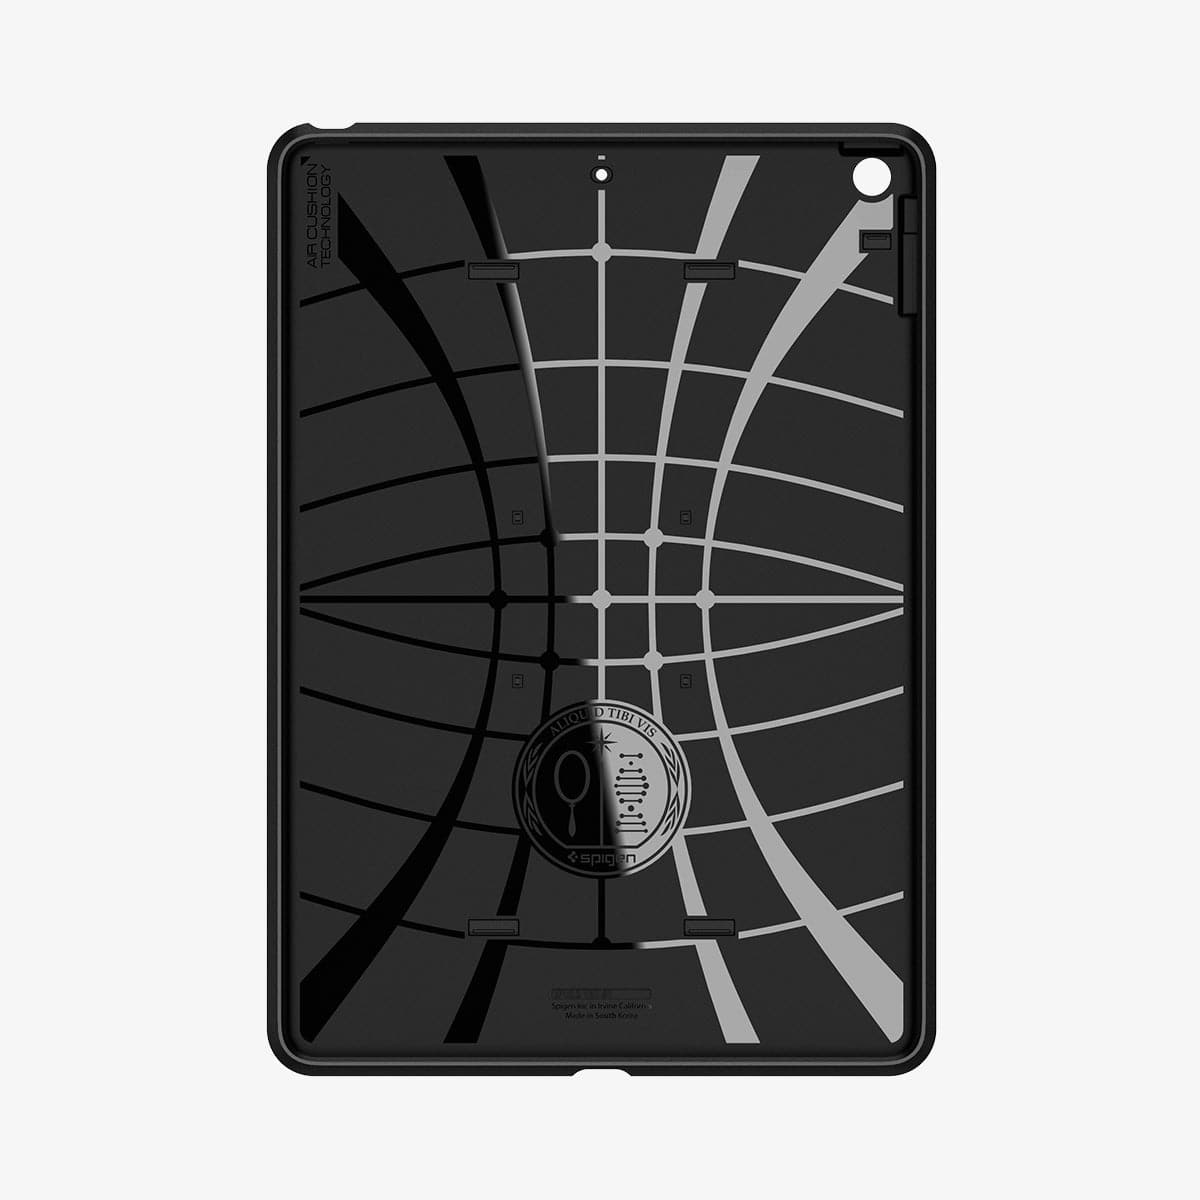 ACS00377 - iPad 10.2" Case Tough Armor Tech in black showing the inside of case